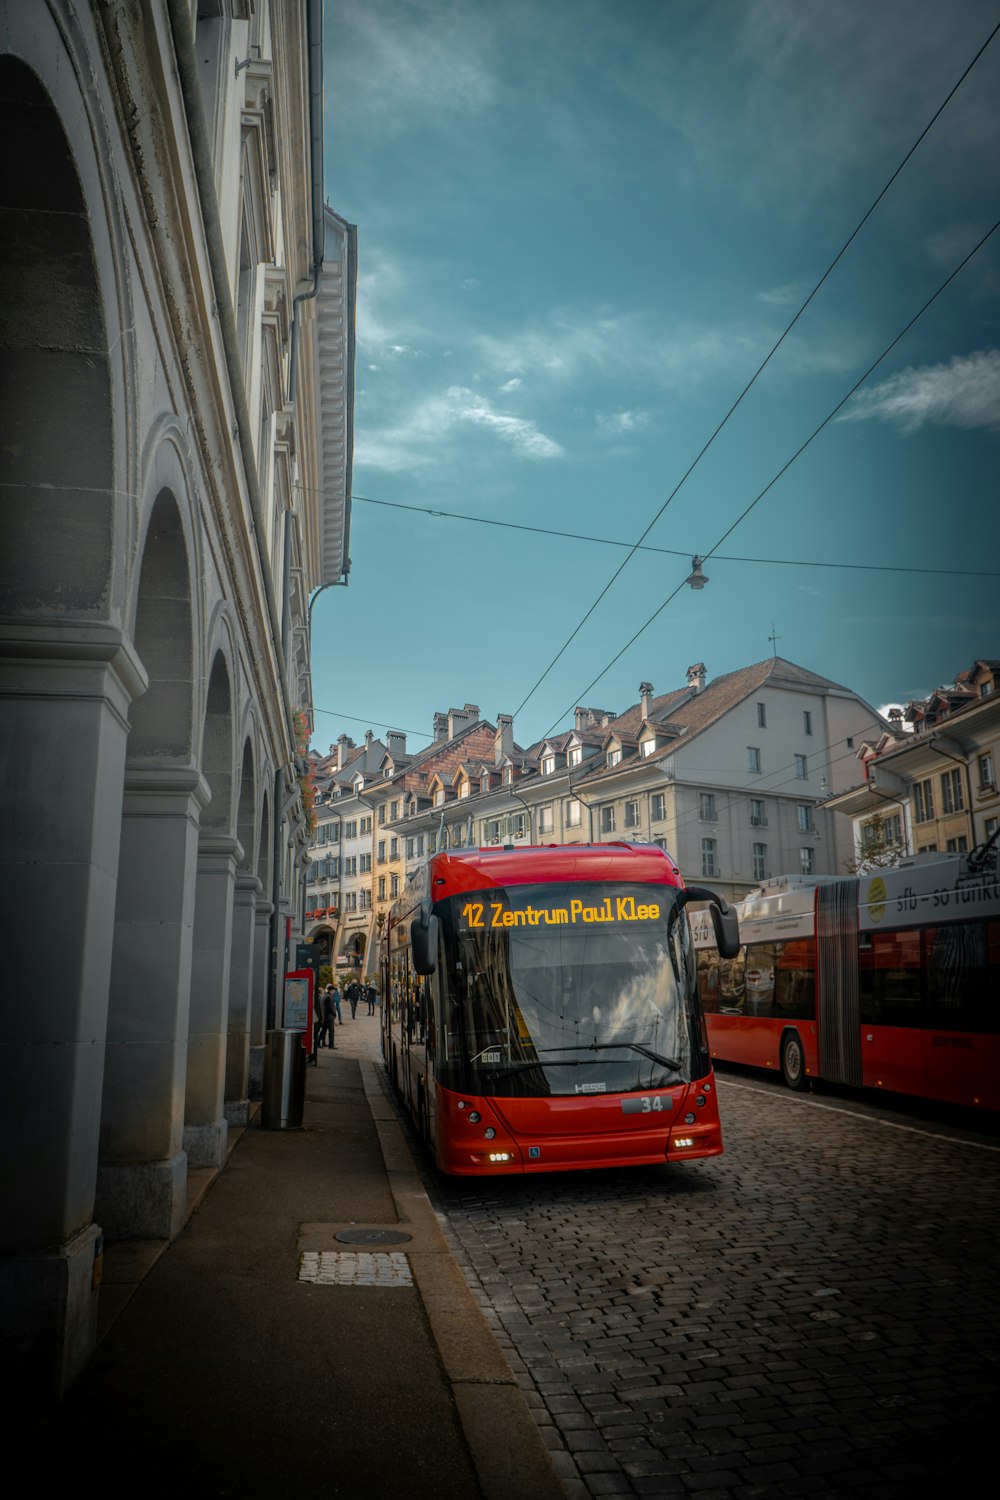 red tram in the city during daytime